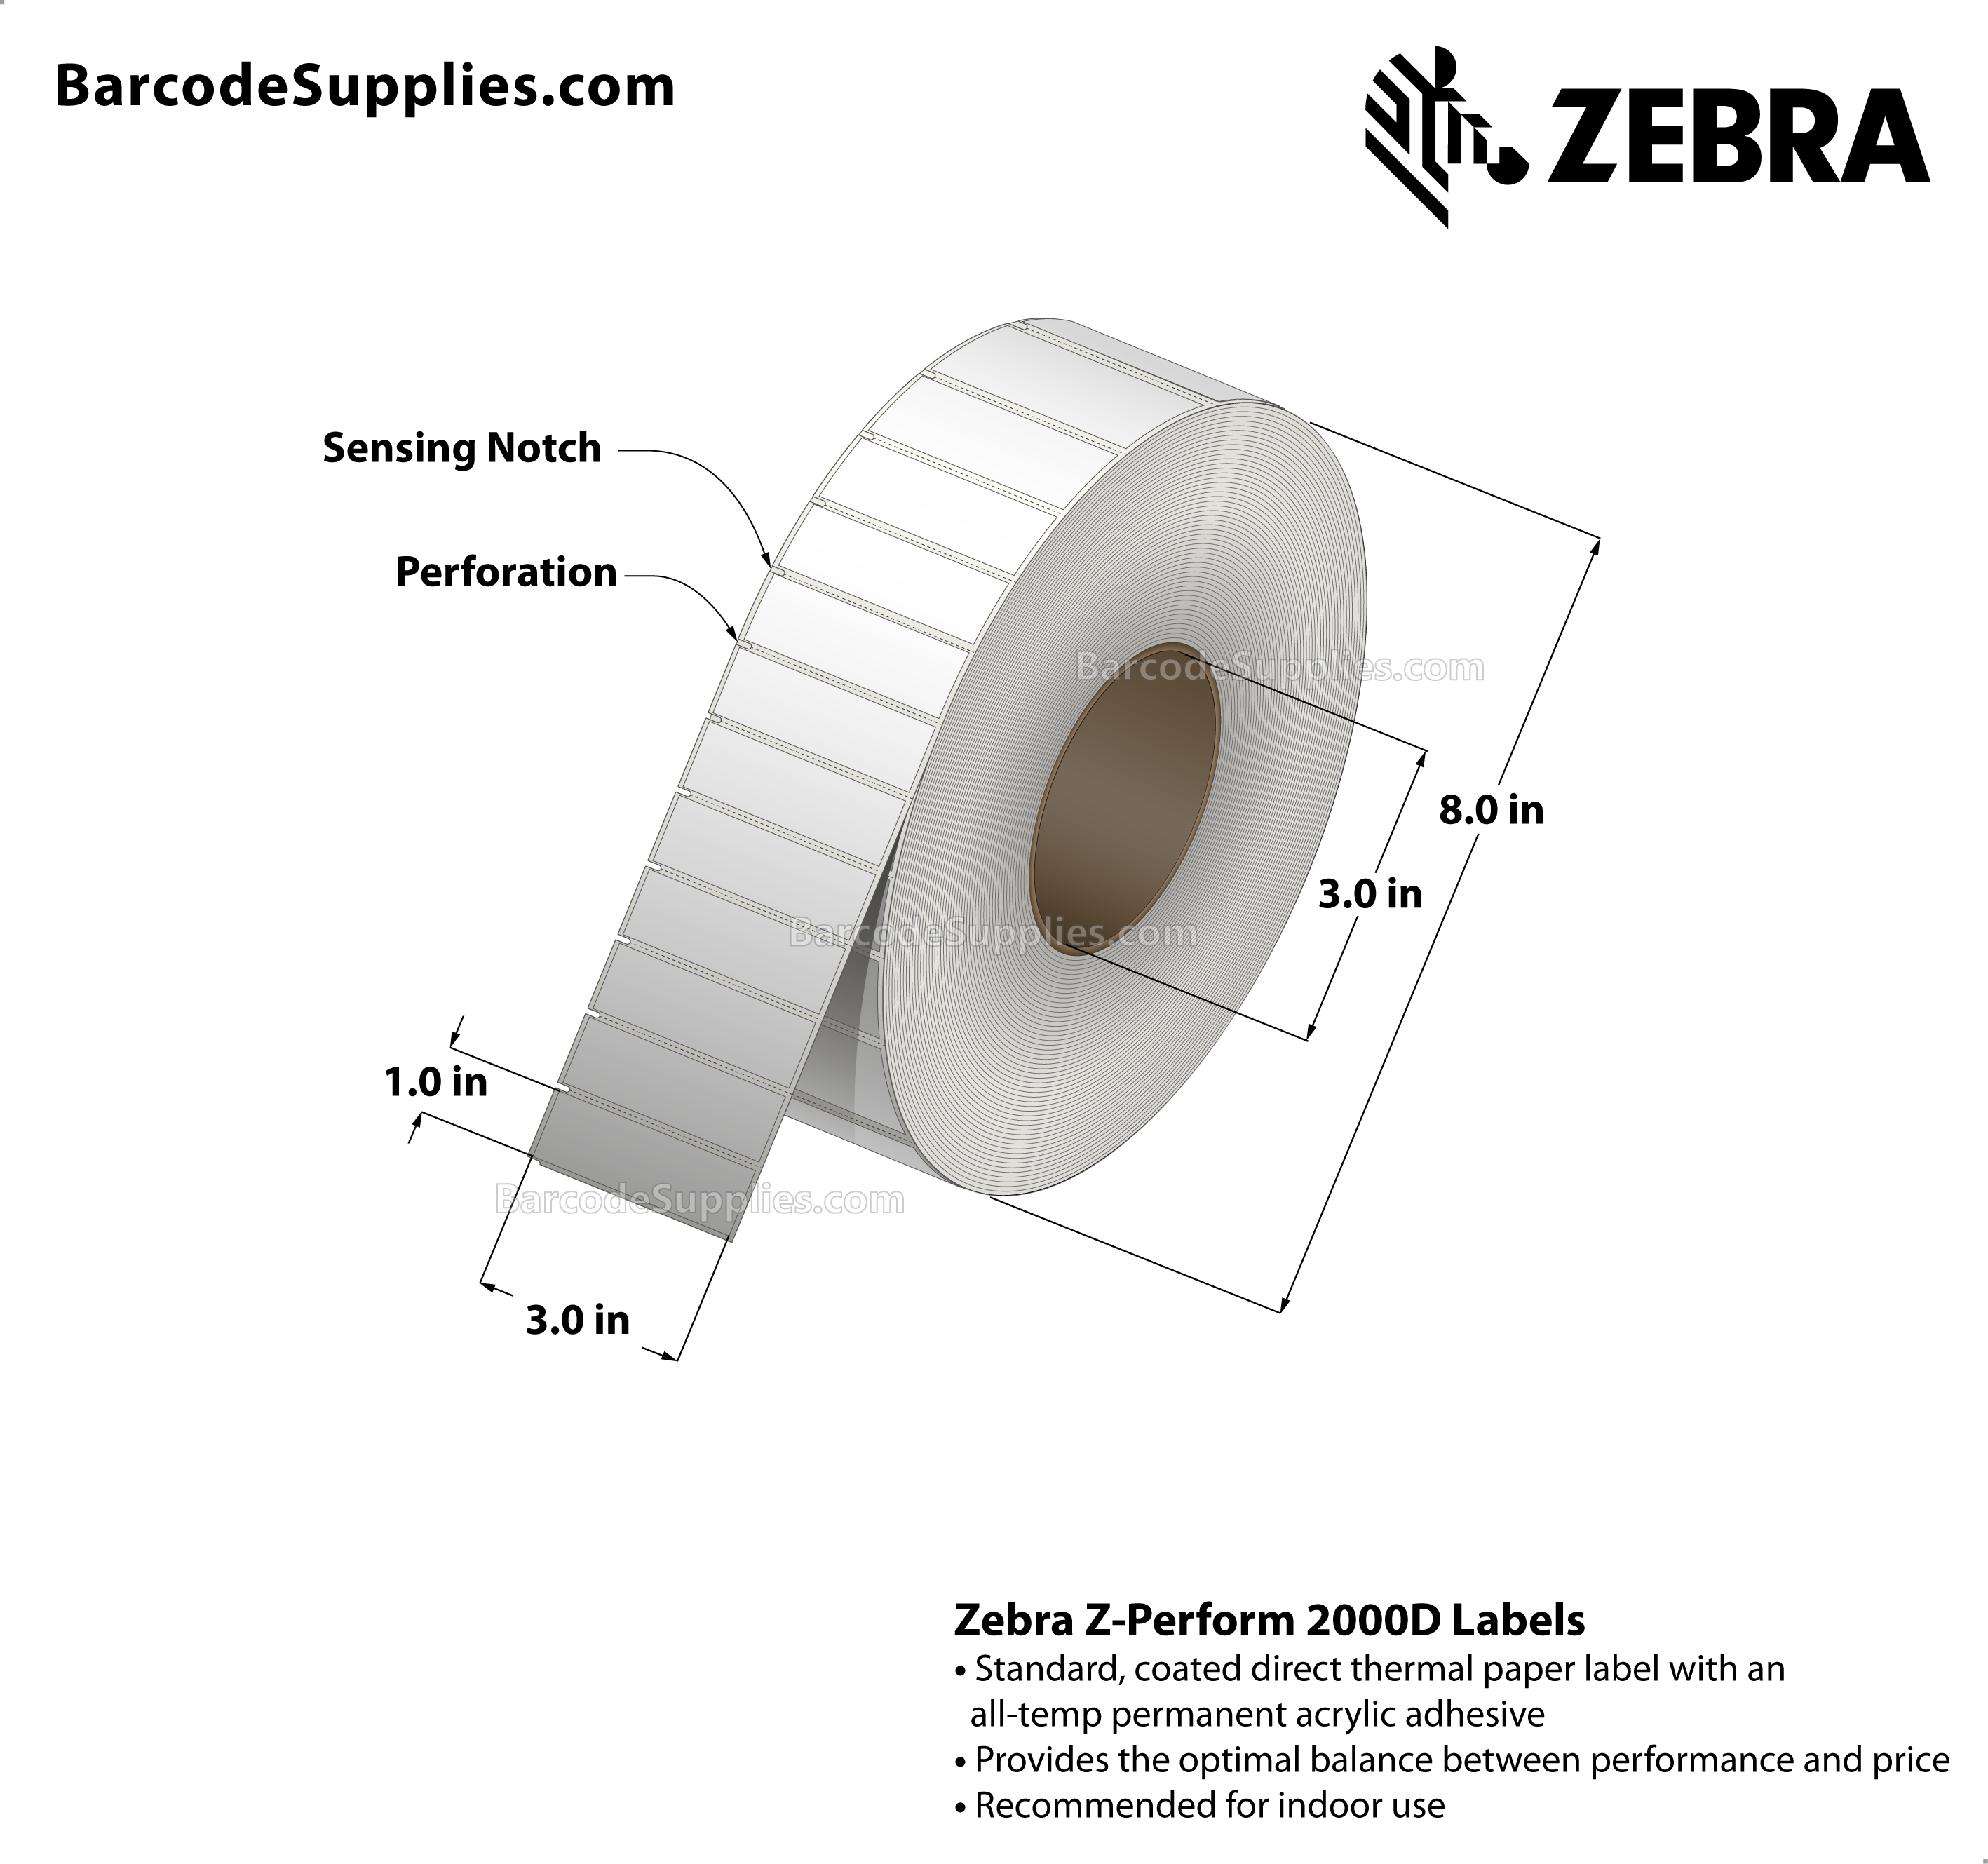 3 x 1 Direct Thermal White Z-Perform 2000D Labels With Permanent Adhesive - Label has square edges and side sensing notches on left side. - Perforated - 5000 Labels Per Roll - Carton Of 2 Rolls - 10000 Labels Total - MPN: 10025363